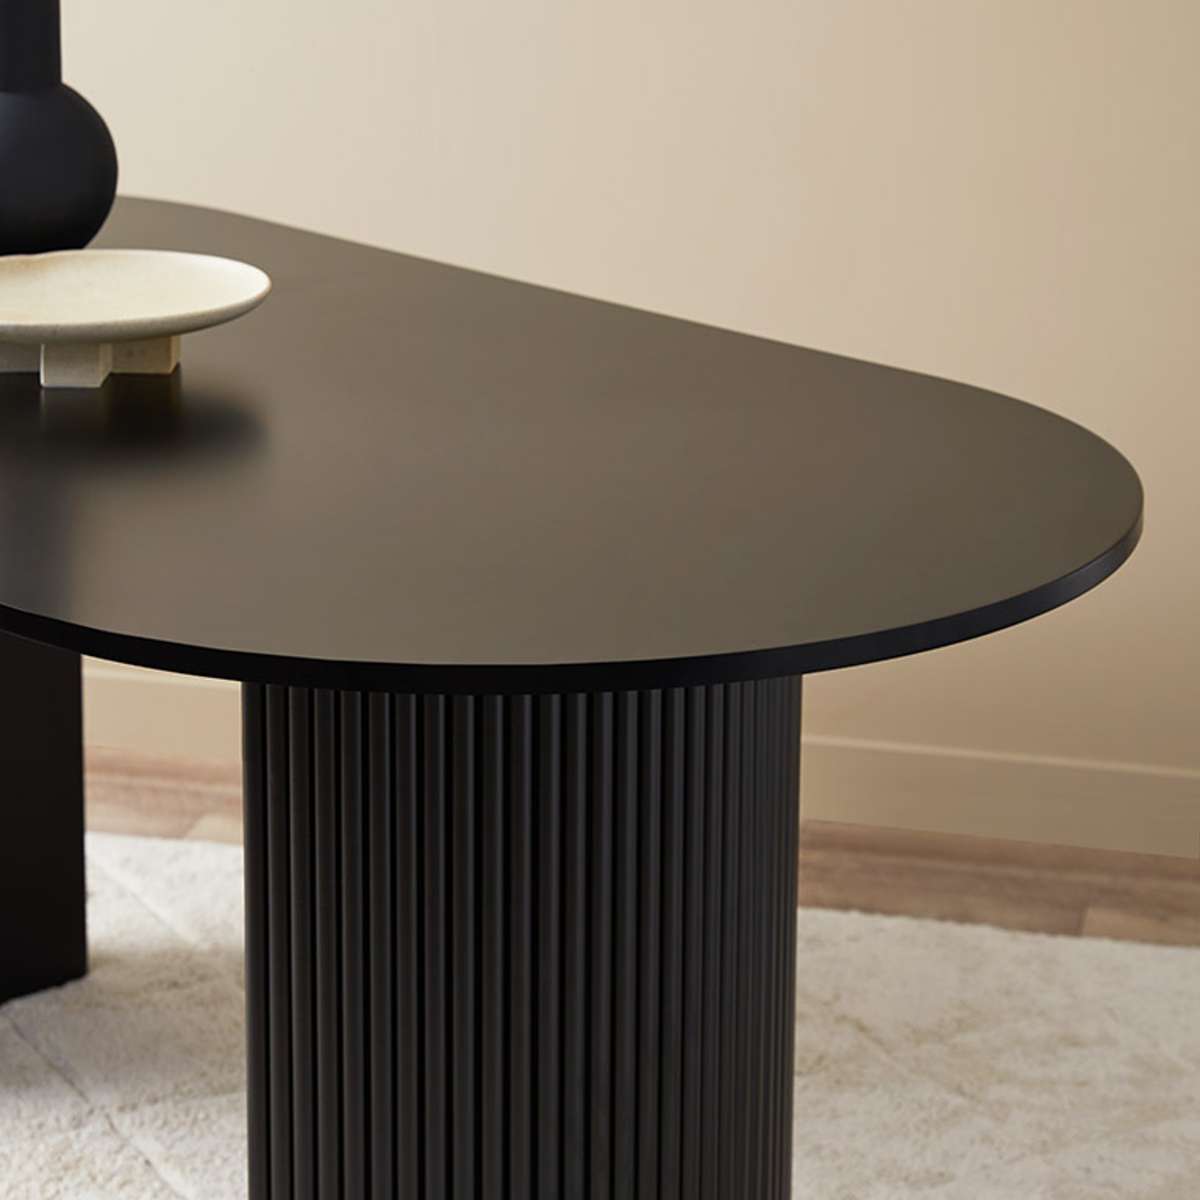 Eve 6 Seater Dining Table - Black